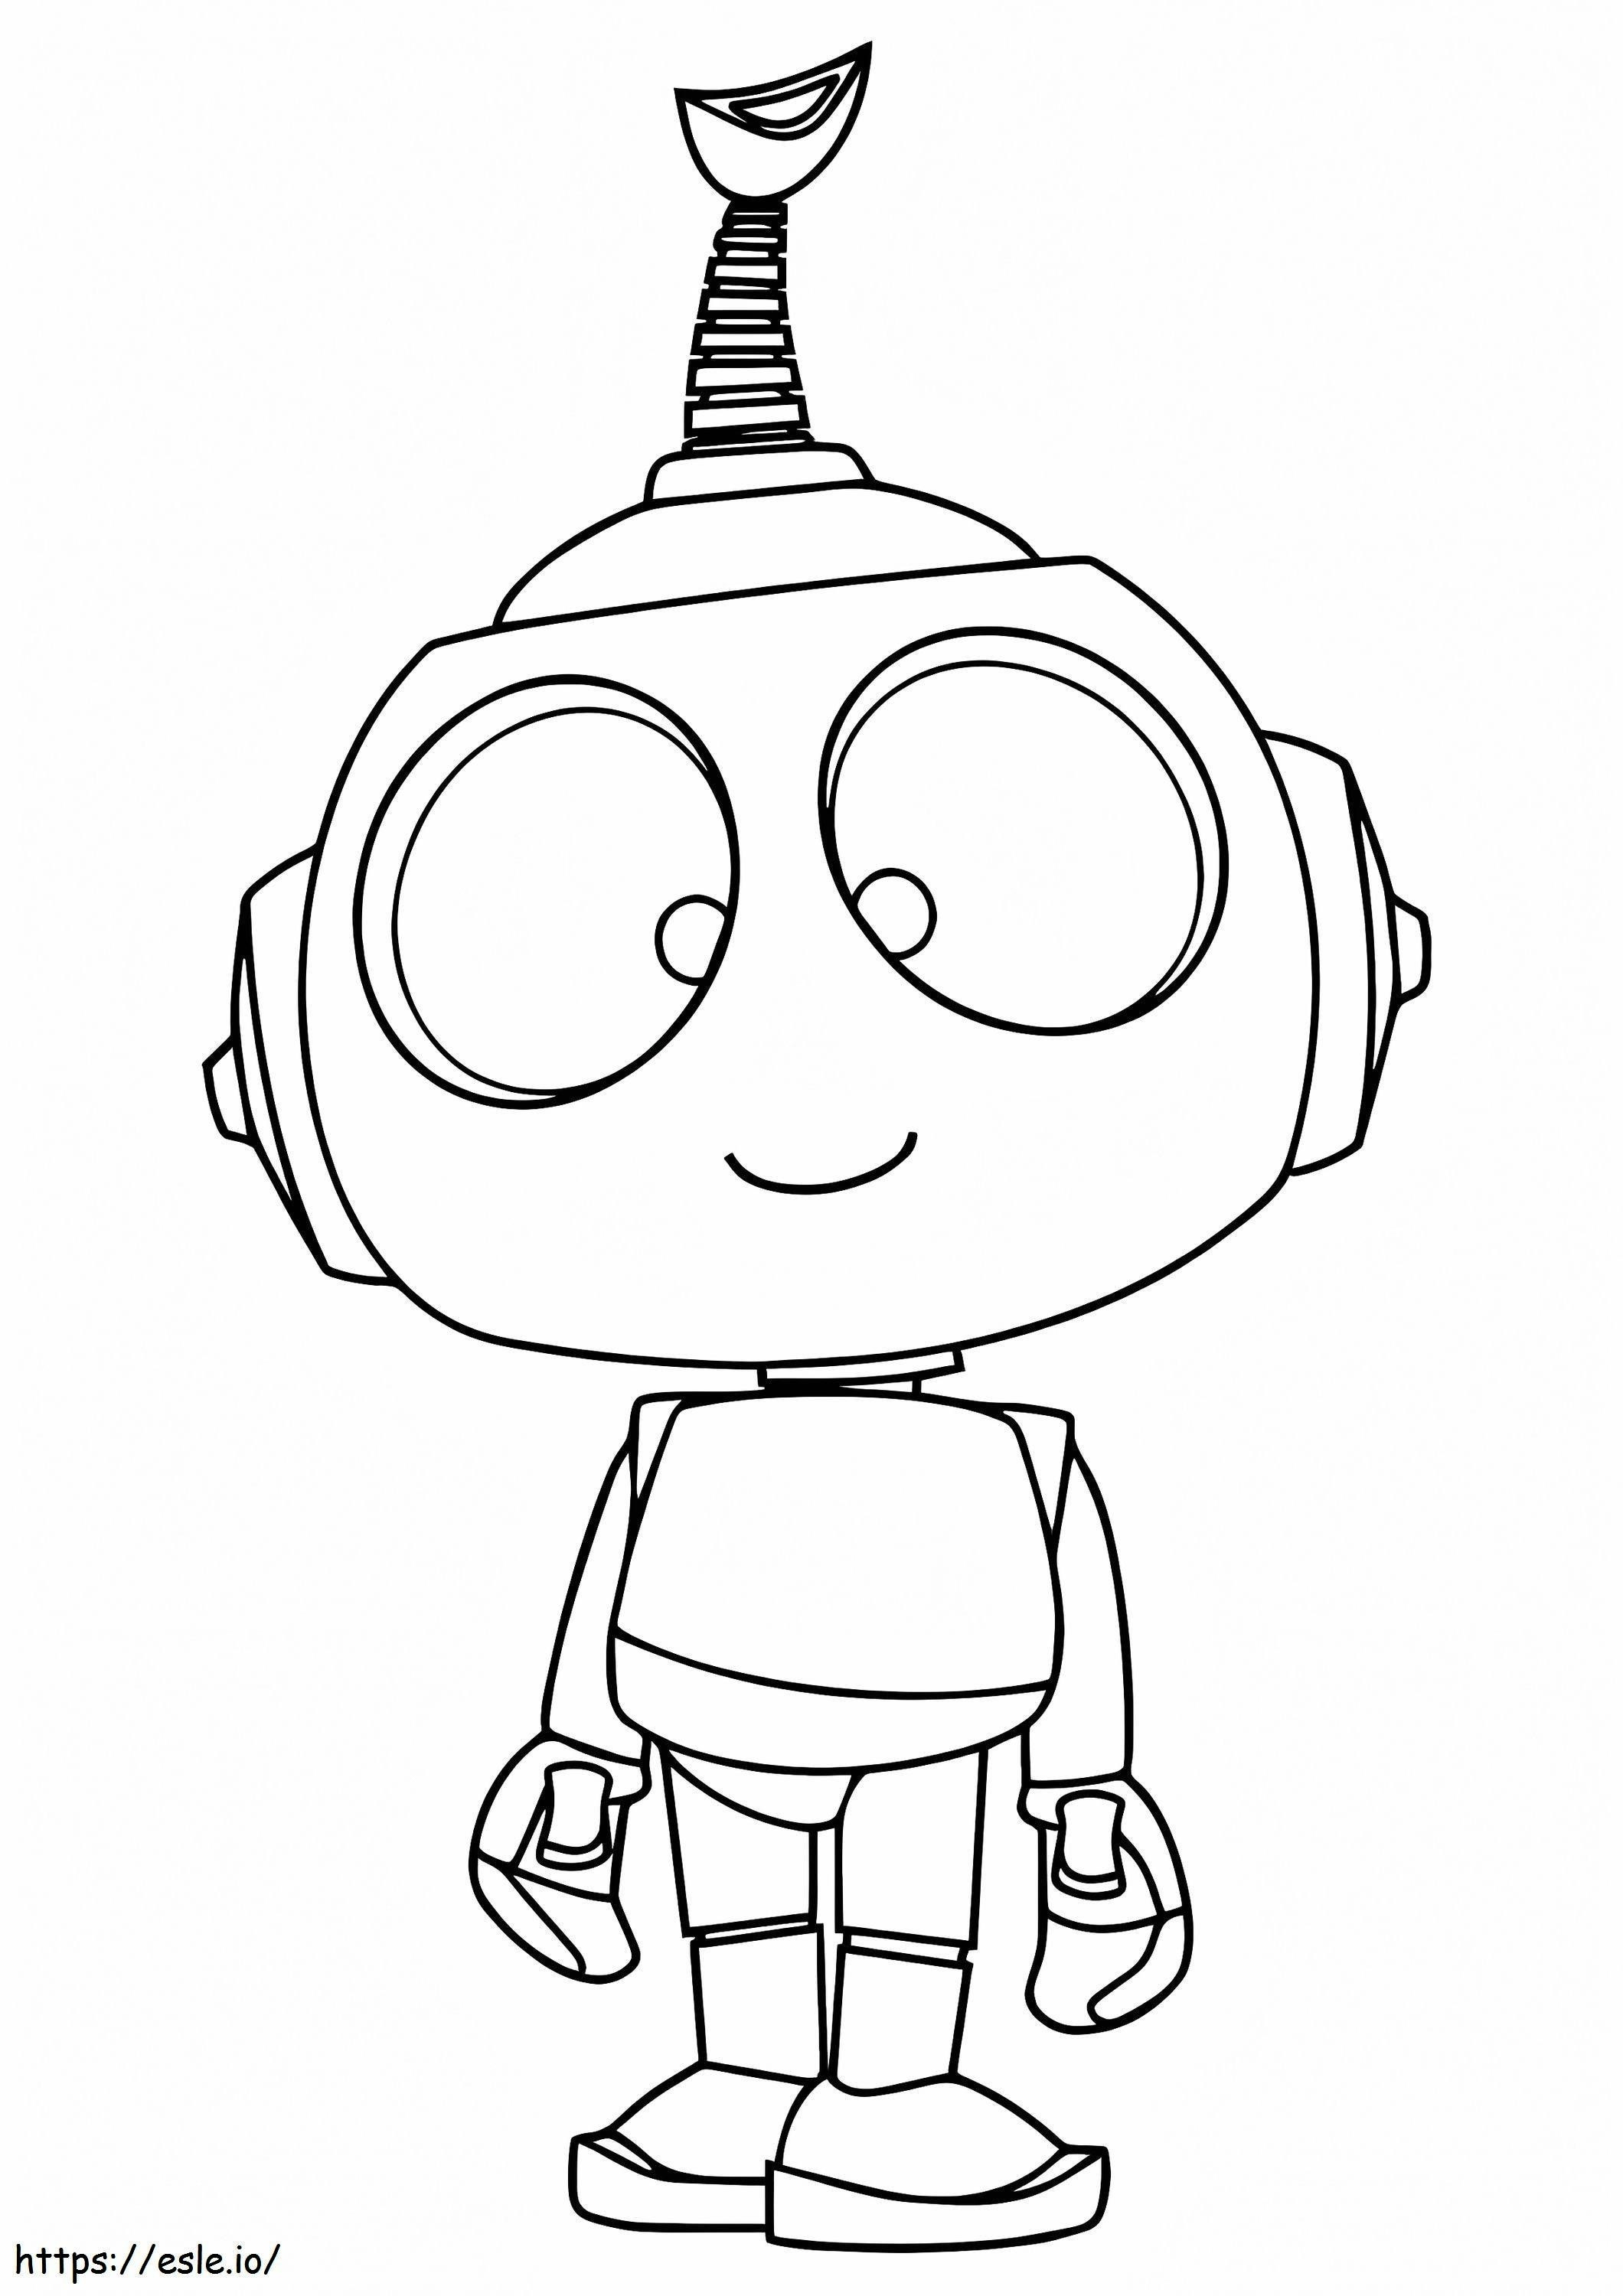 Robot Rob coloring page